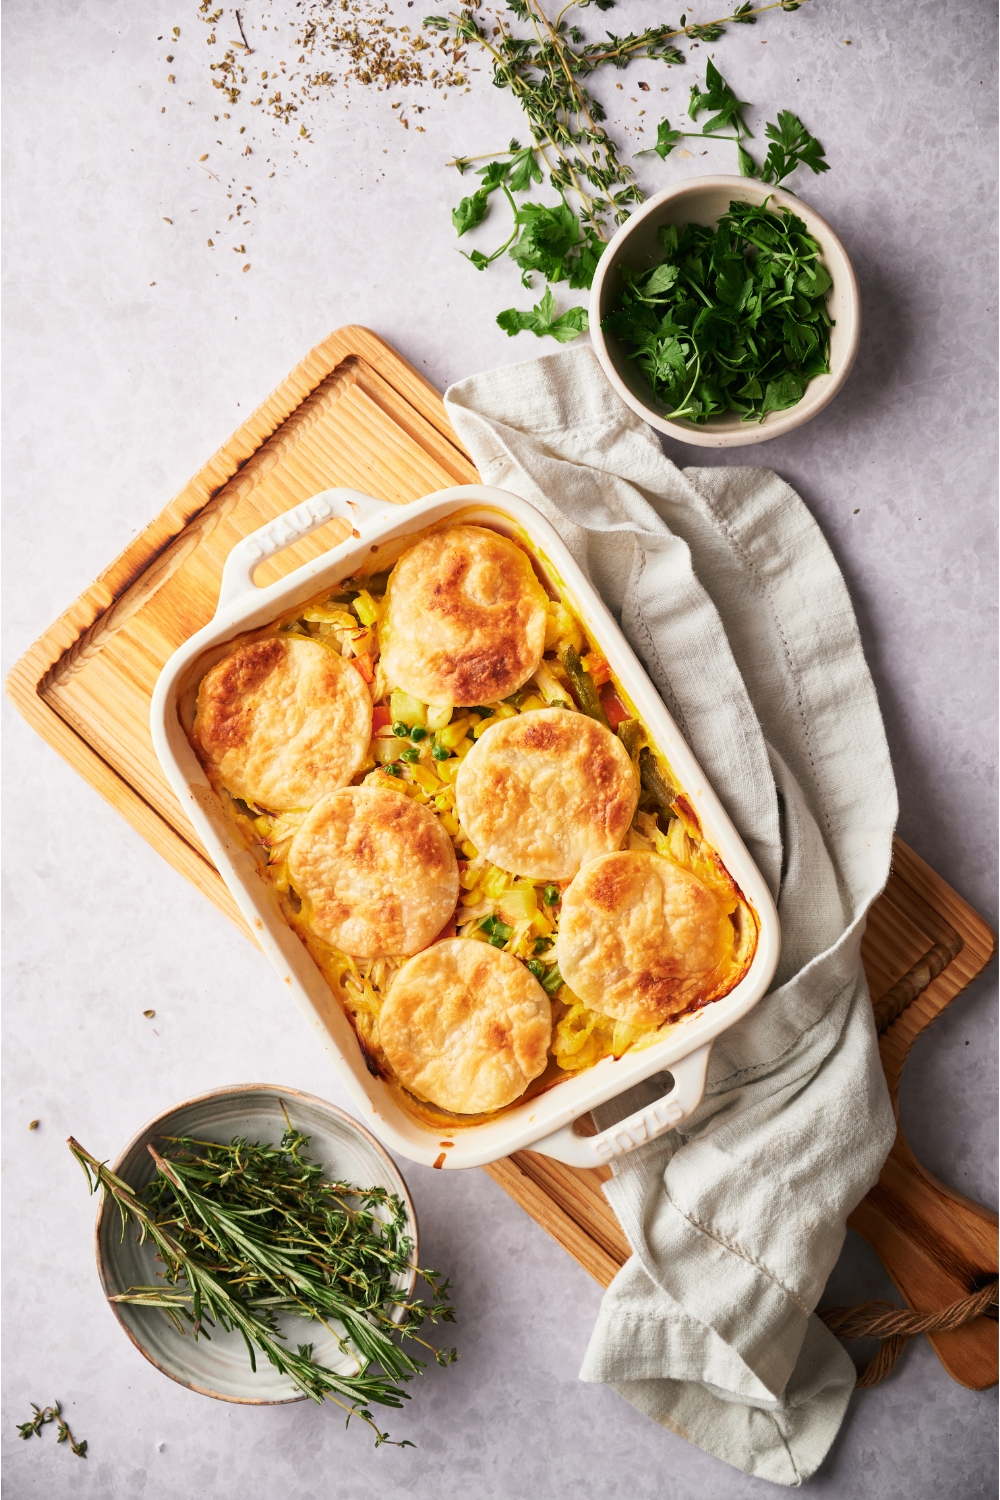 A white casserole dish with chicken pot pie casserole freshly baked. The dish is on a wood board and surrounded by bowls of fresh parsley and rosemary, as well as a dish towel.